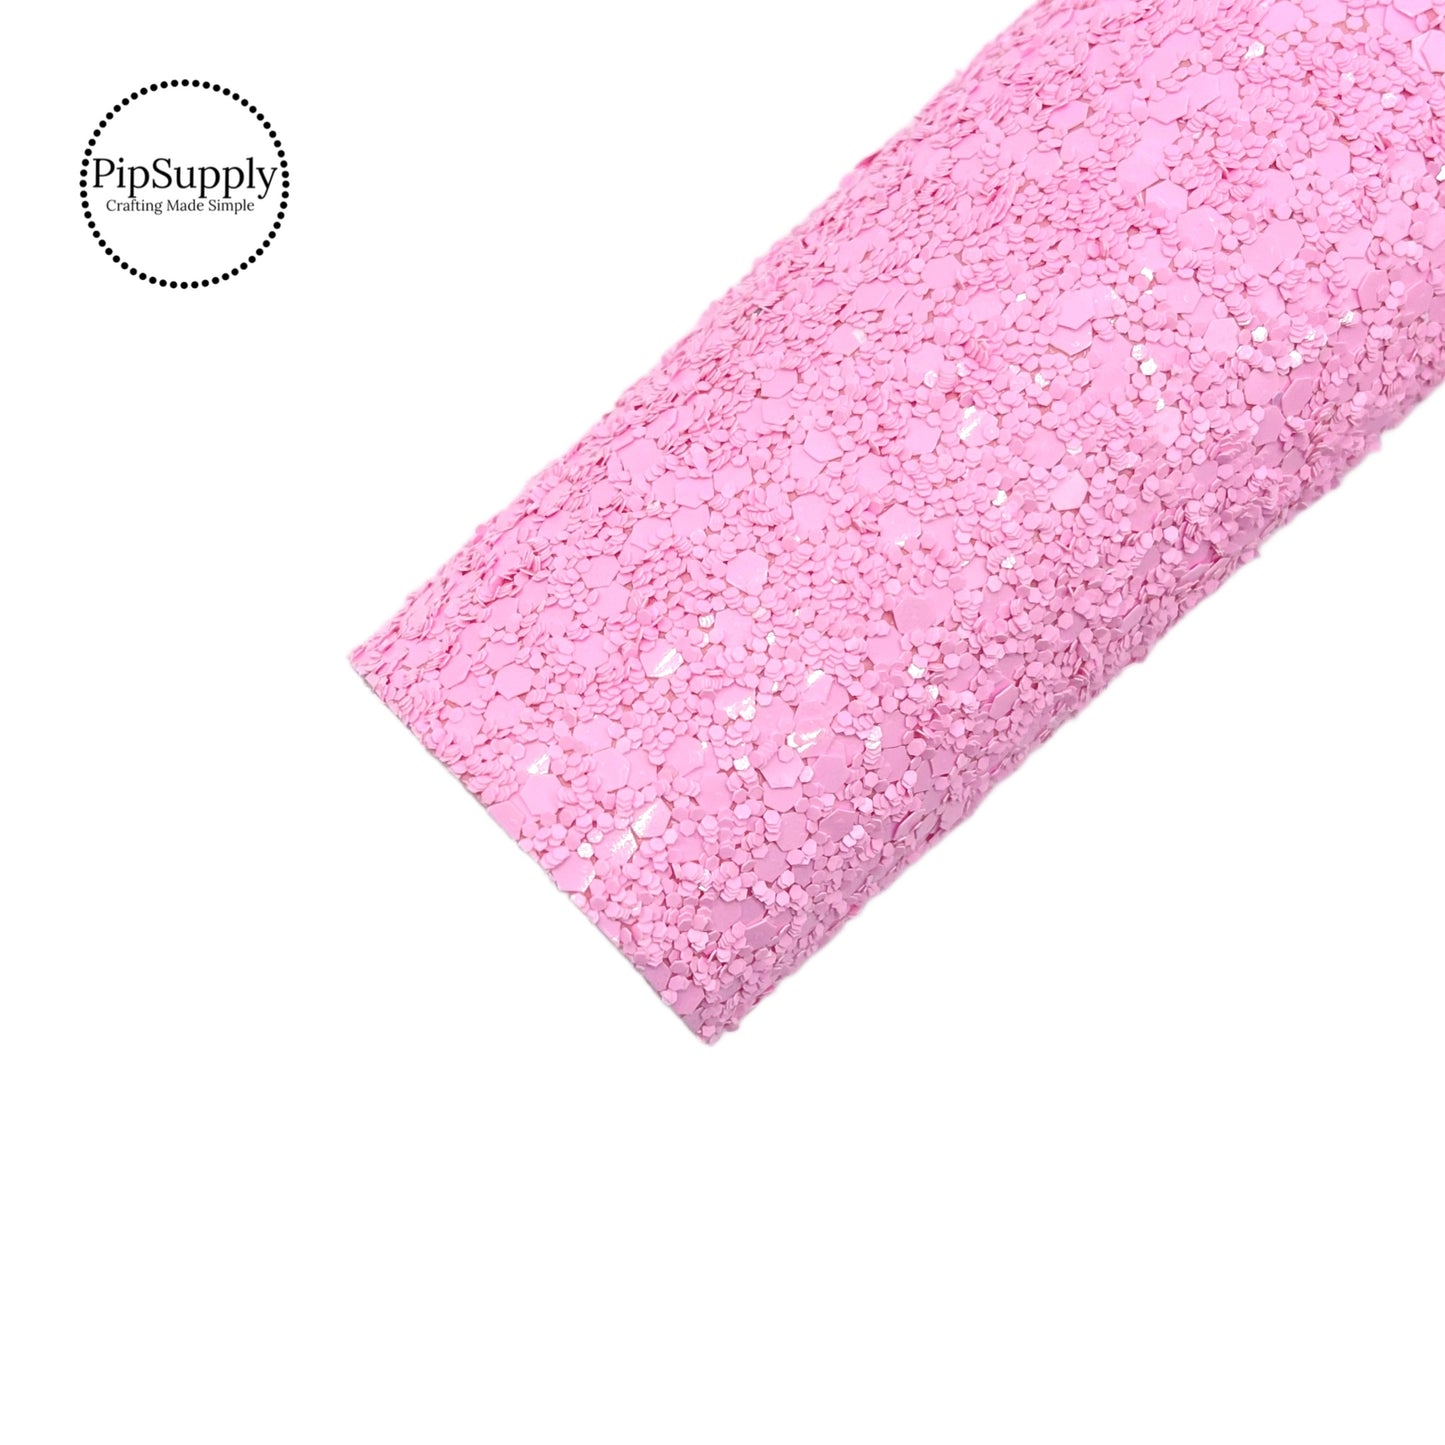 These frosted pink glitter sheets have extra glitter to give full coverage without cracking or flaking. Glitter sheets have a soft backing for easy cutting and assembly of your next craft project.